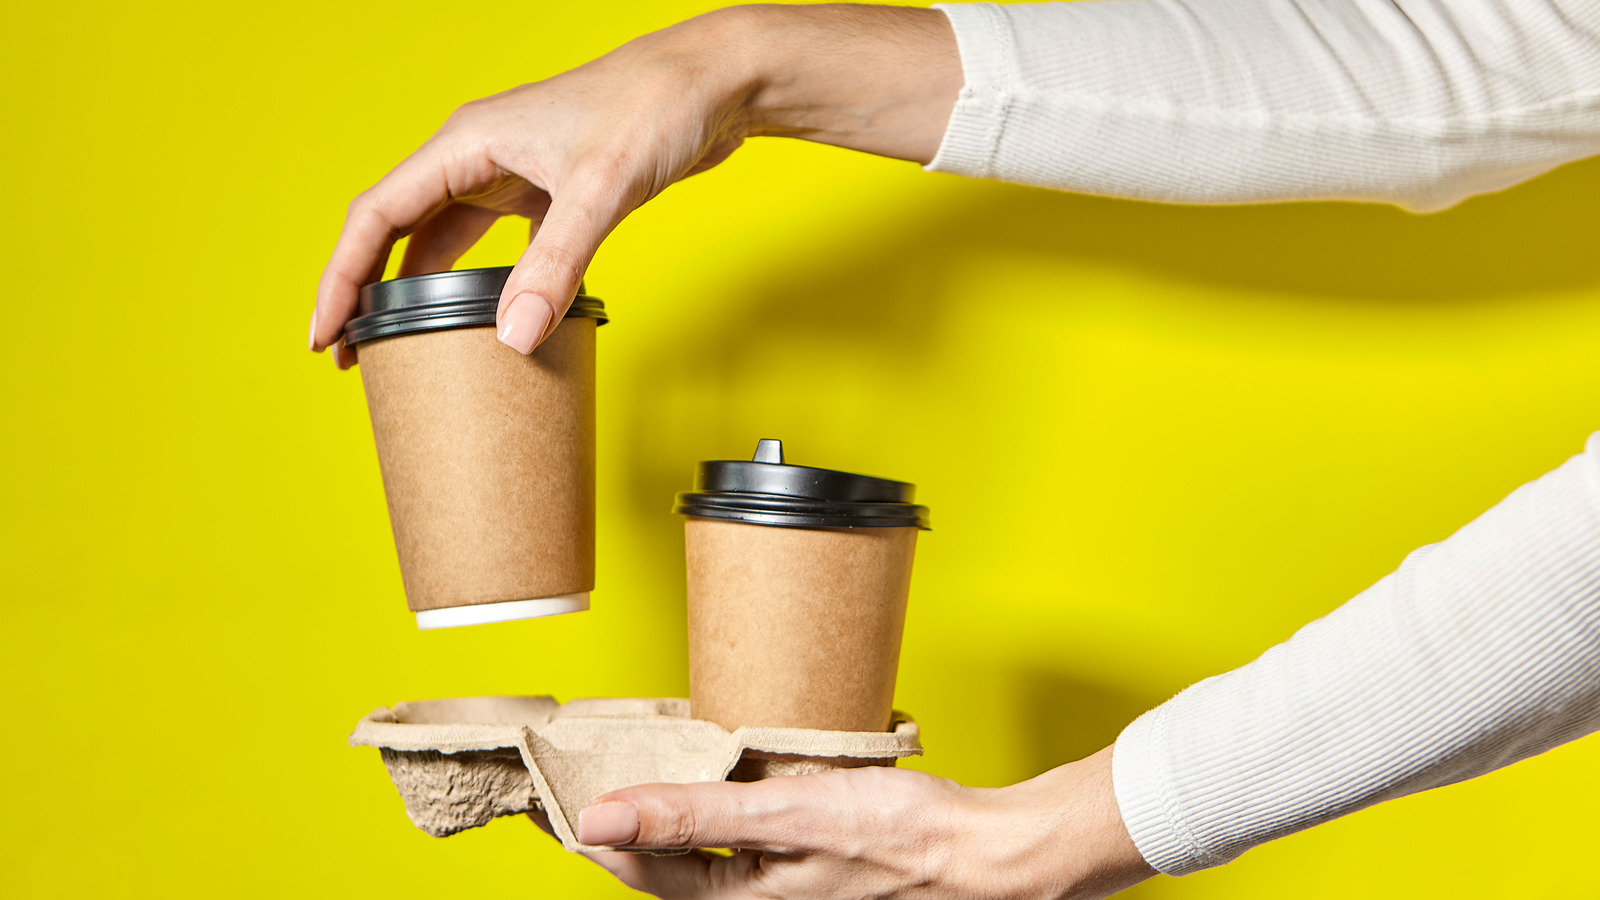 https://www.tastingtable.com/img/gallery/the-reason-single-use-coffee-cups-usually-arent-recyclable/l-intro-1662964533.jpg